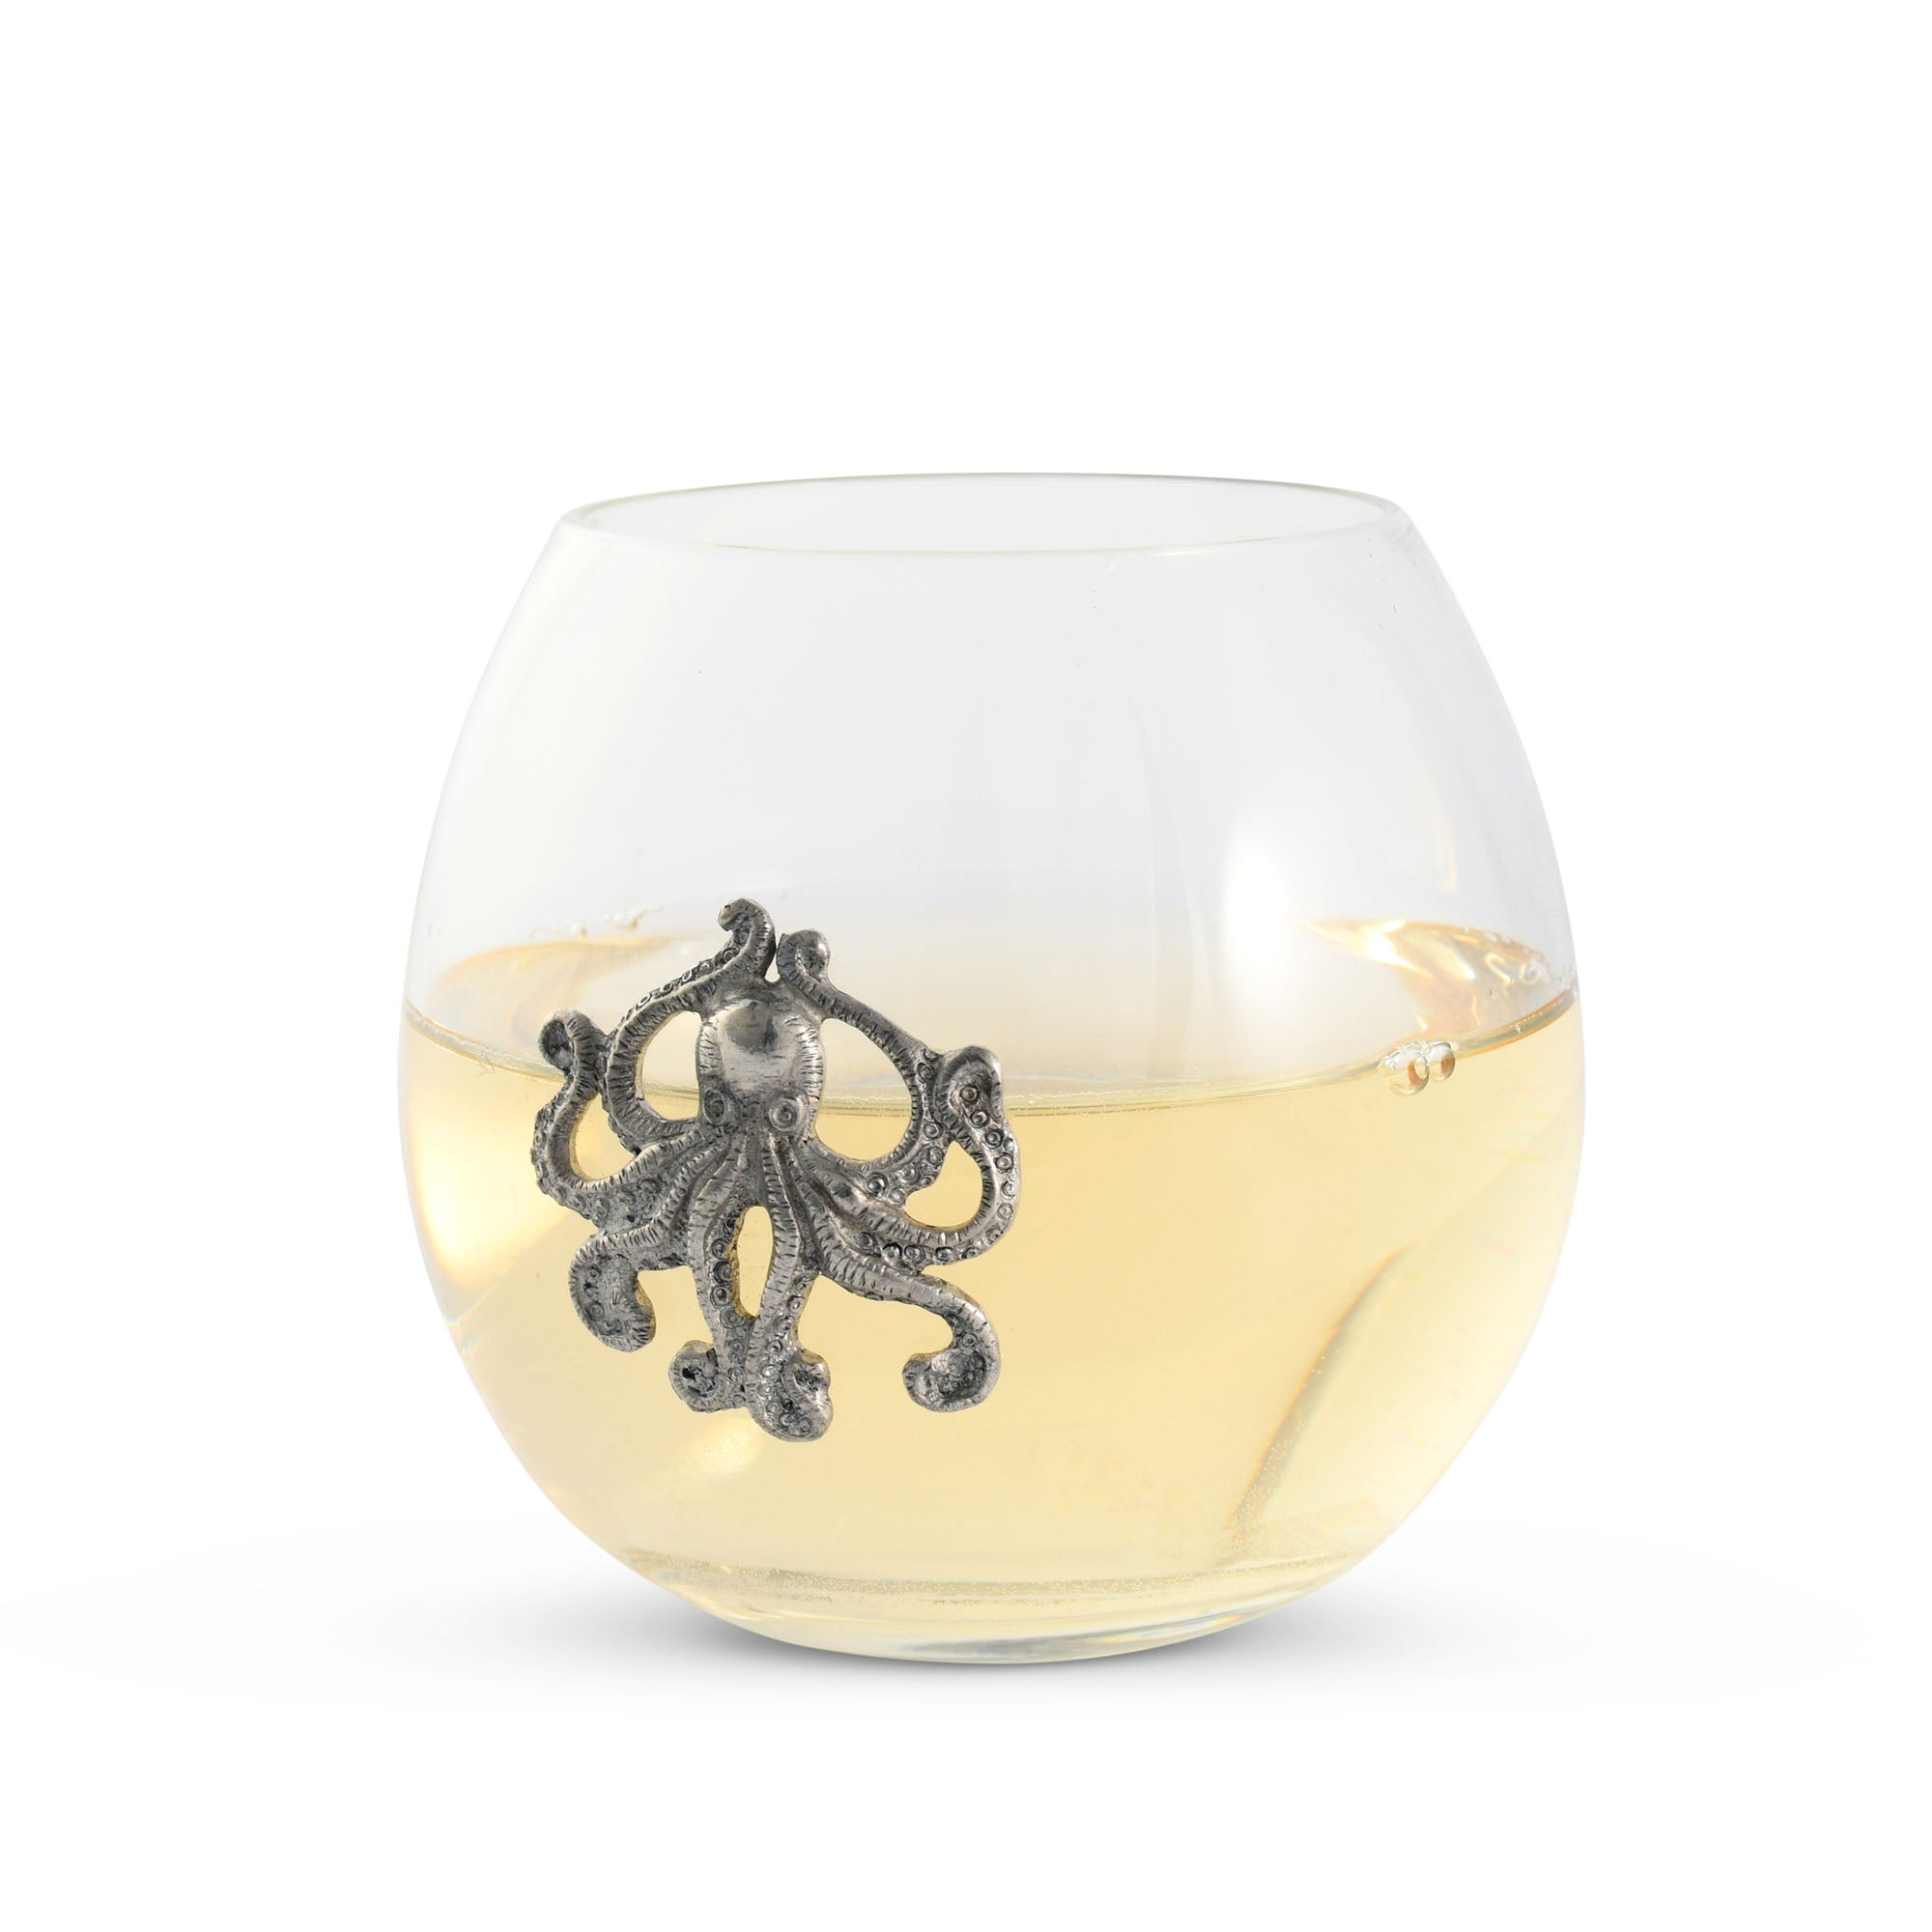 Vagabond House Octopus Stemless Wine Glass Product Image